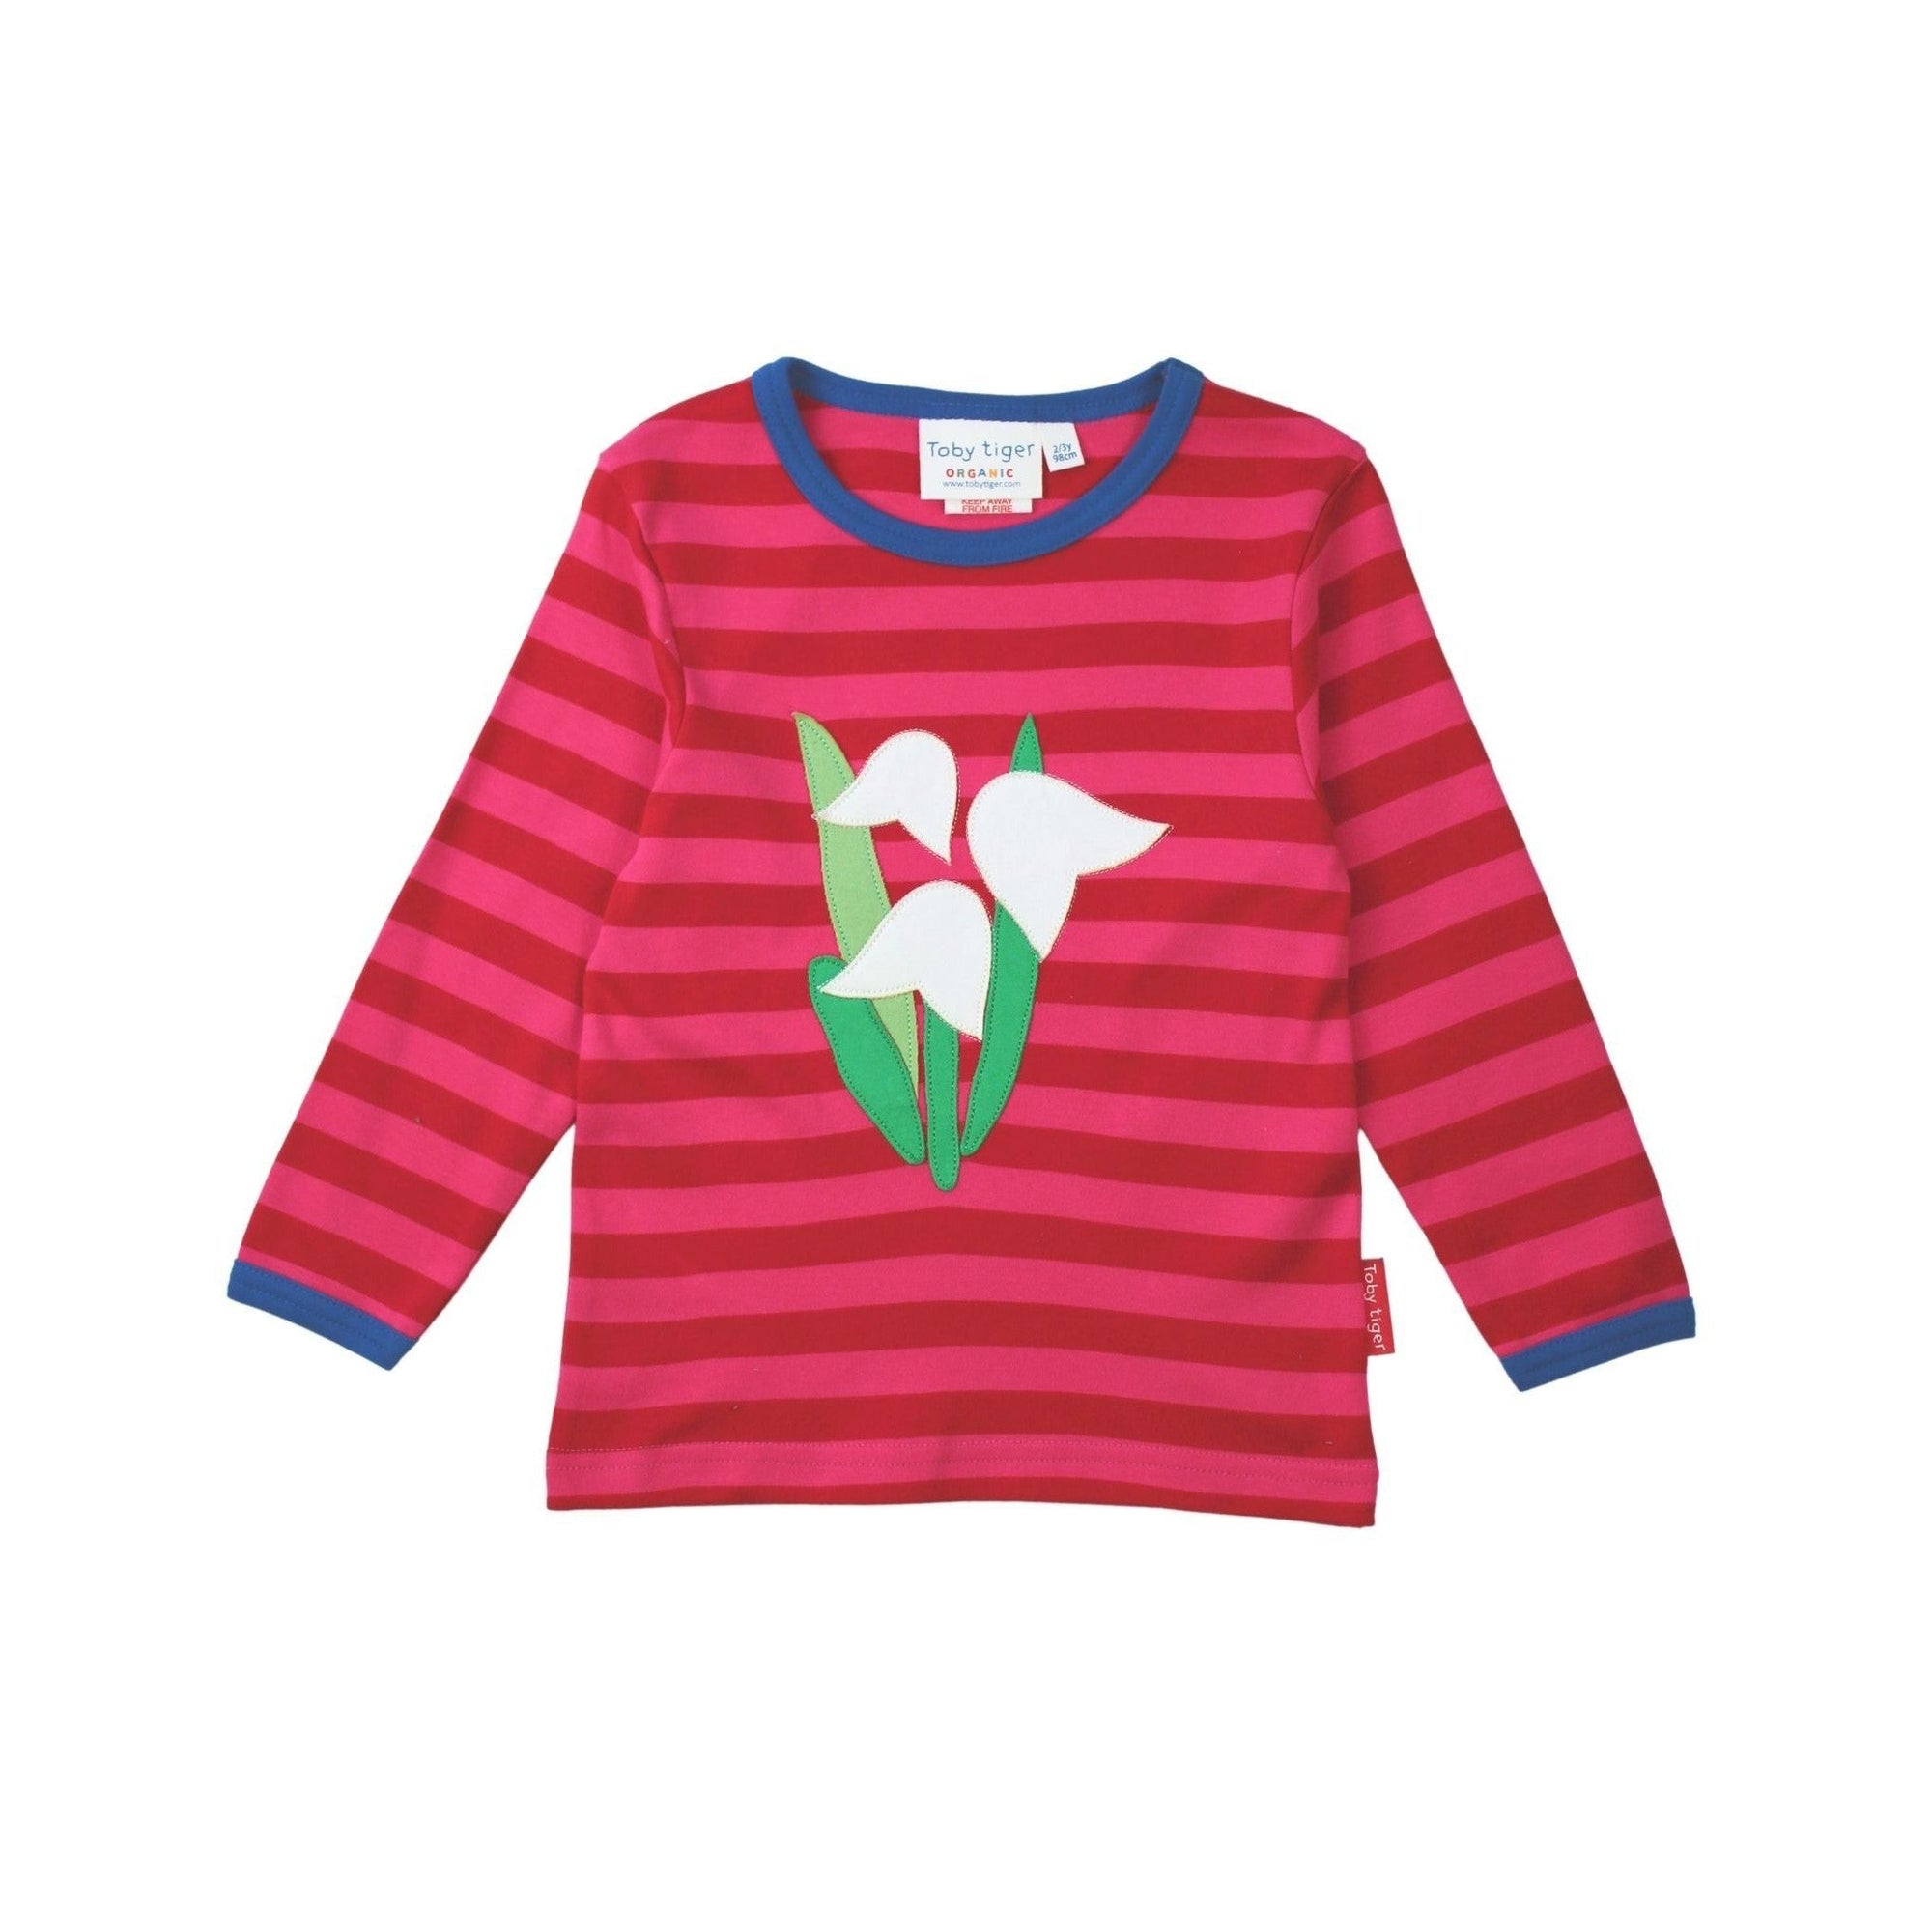 Snowdrop Applique Long Sleeve Shirt - 1 Left Size 6-7 years-Toby Tiger-Modern Rascals